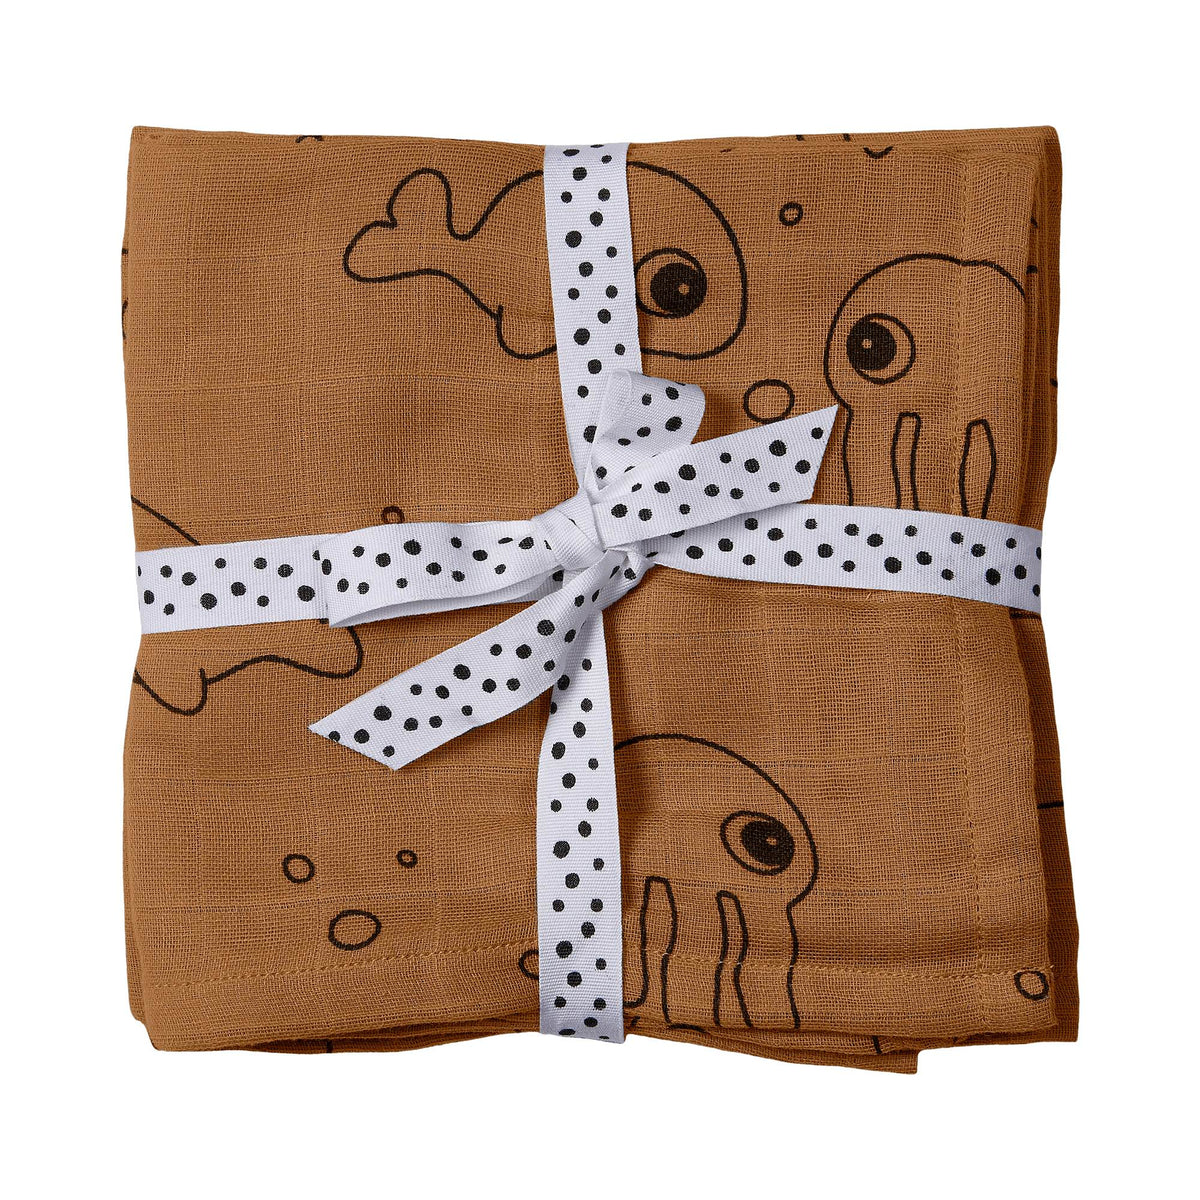 Burp cloth 2-pack - Sea friends - Mustard - Front